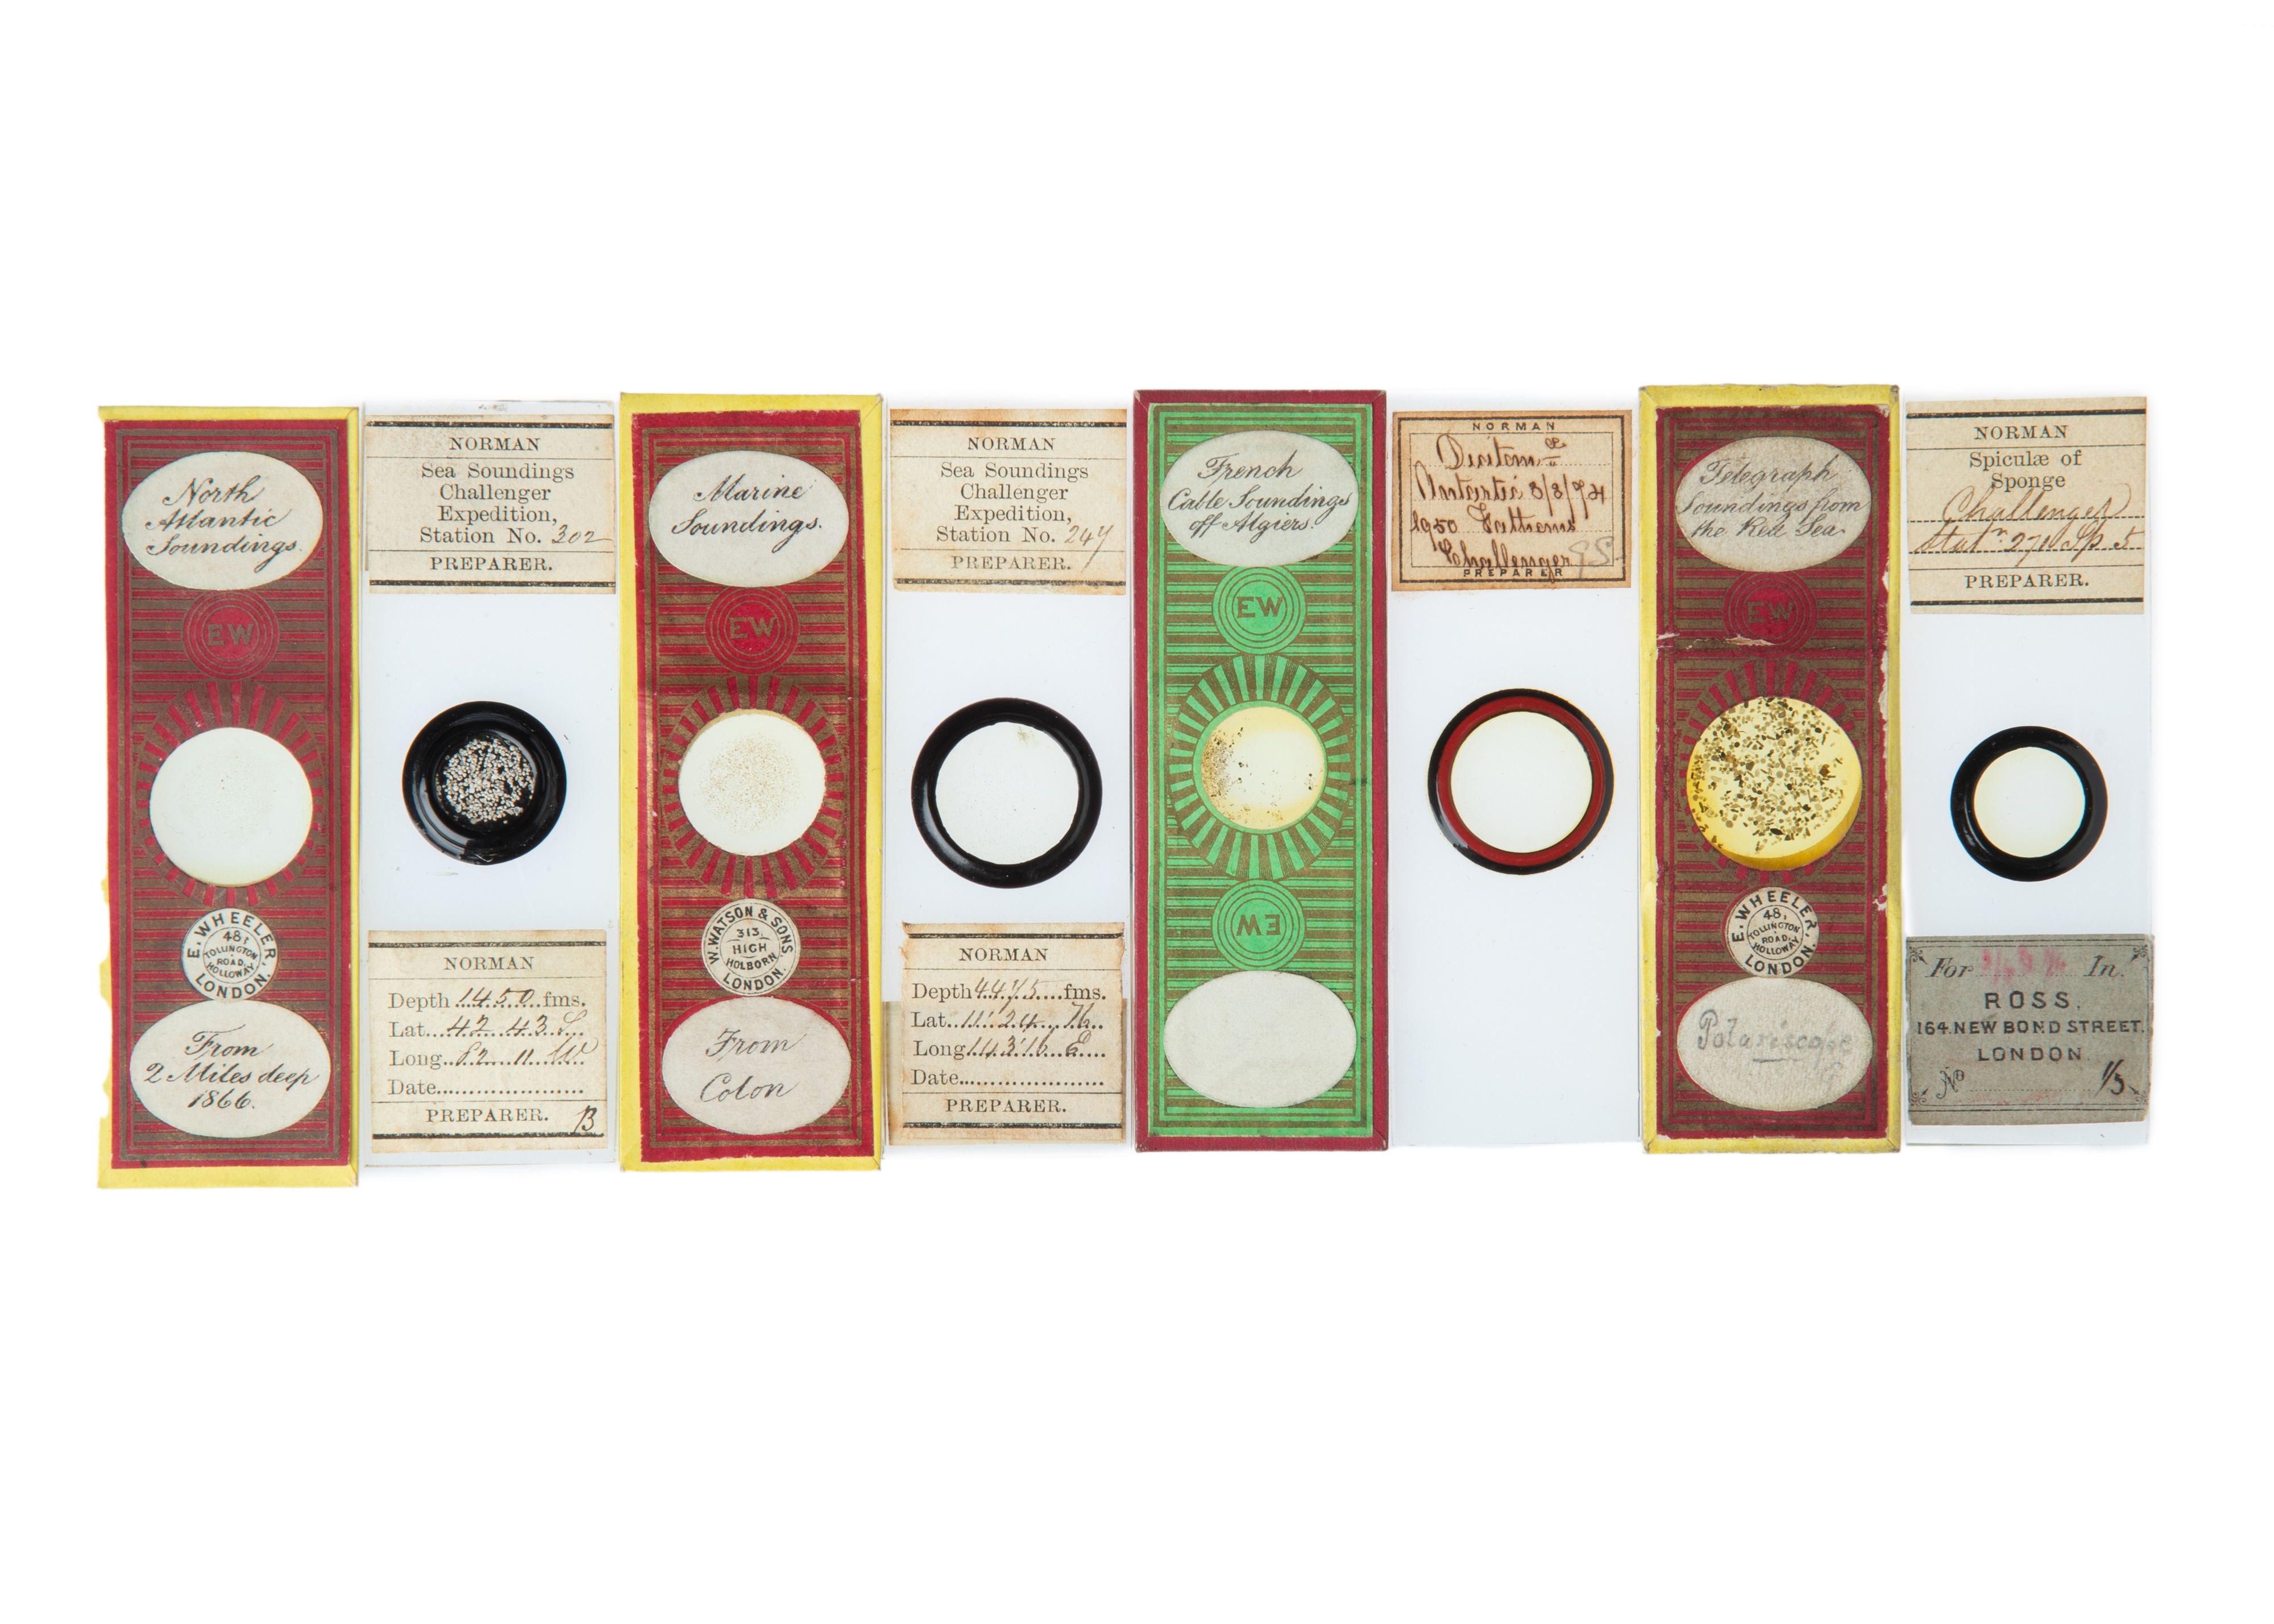 A Collection of 12 Challenger Expedition Microscope Slides,